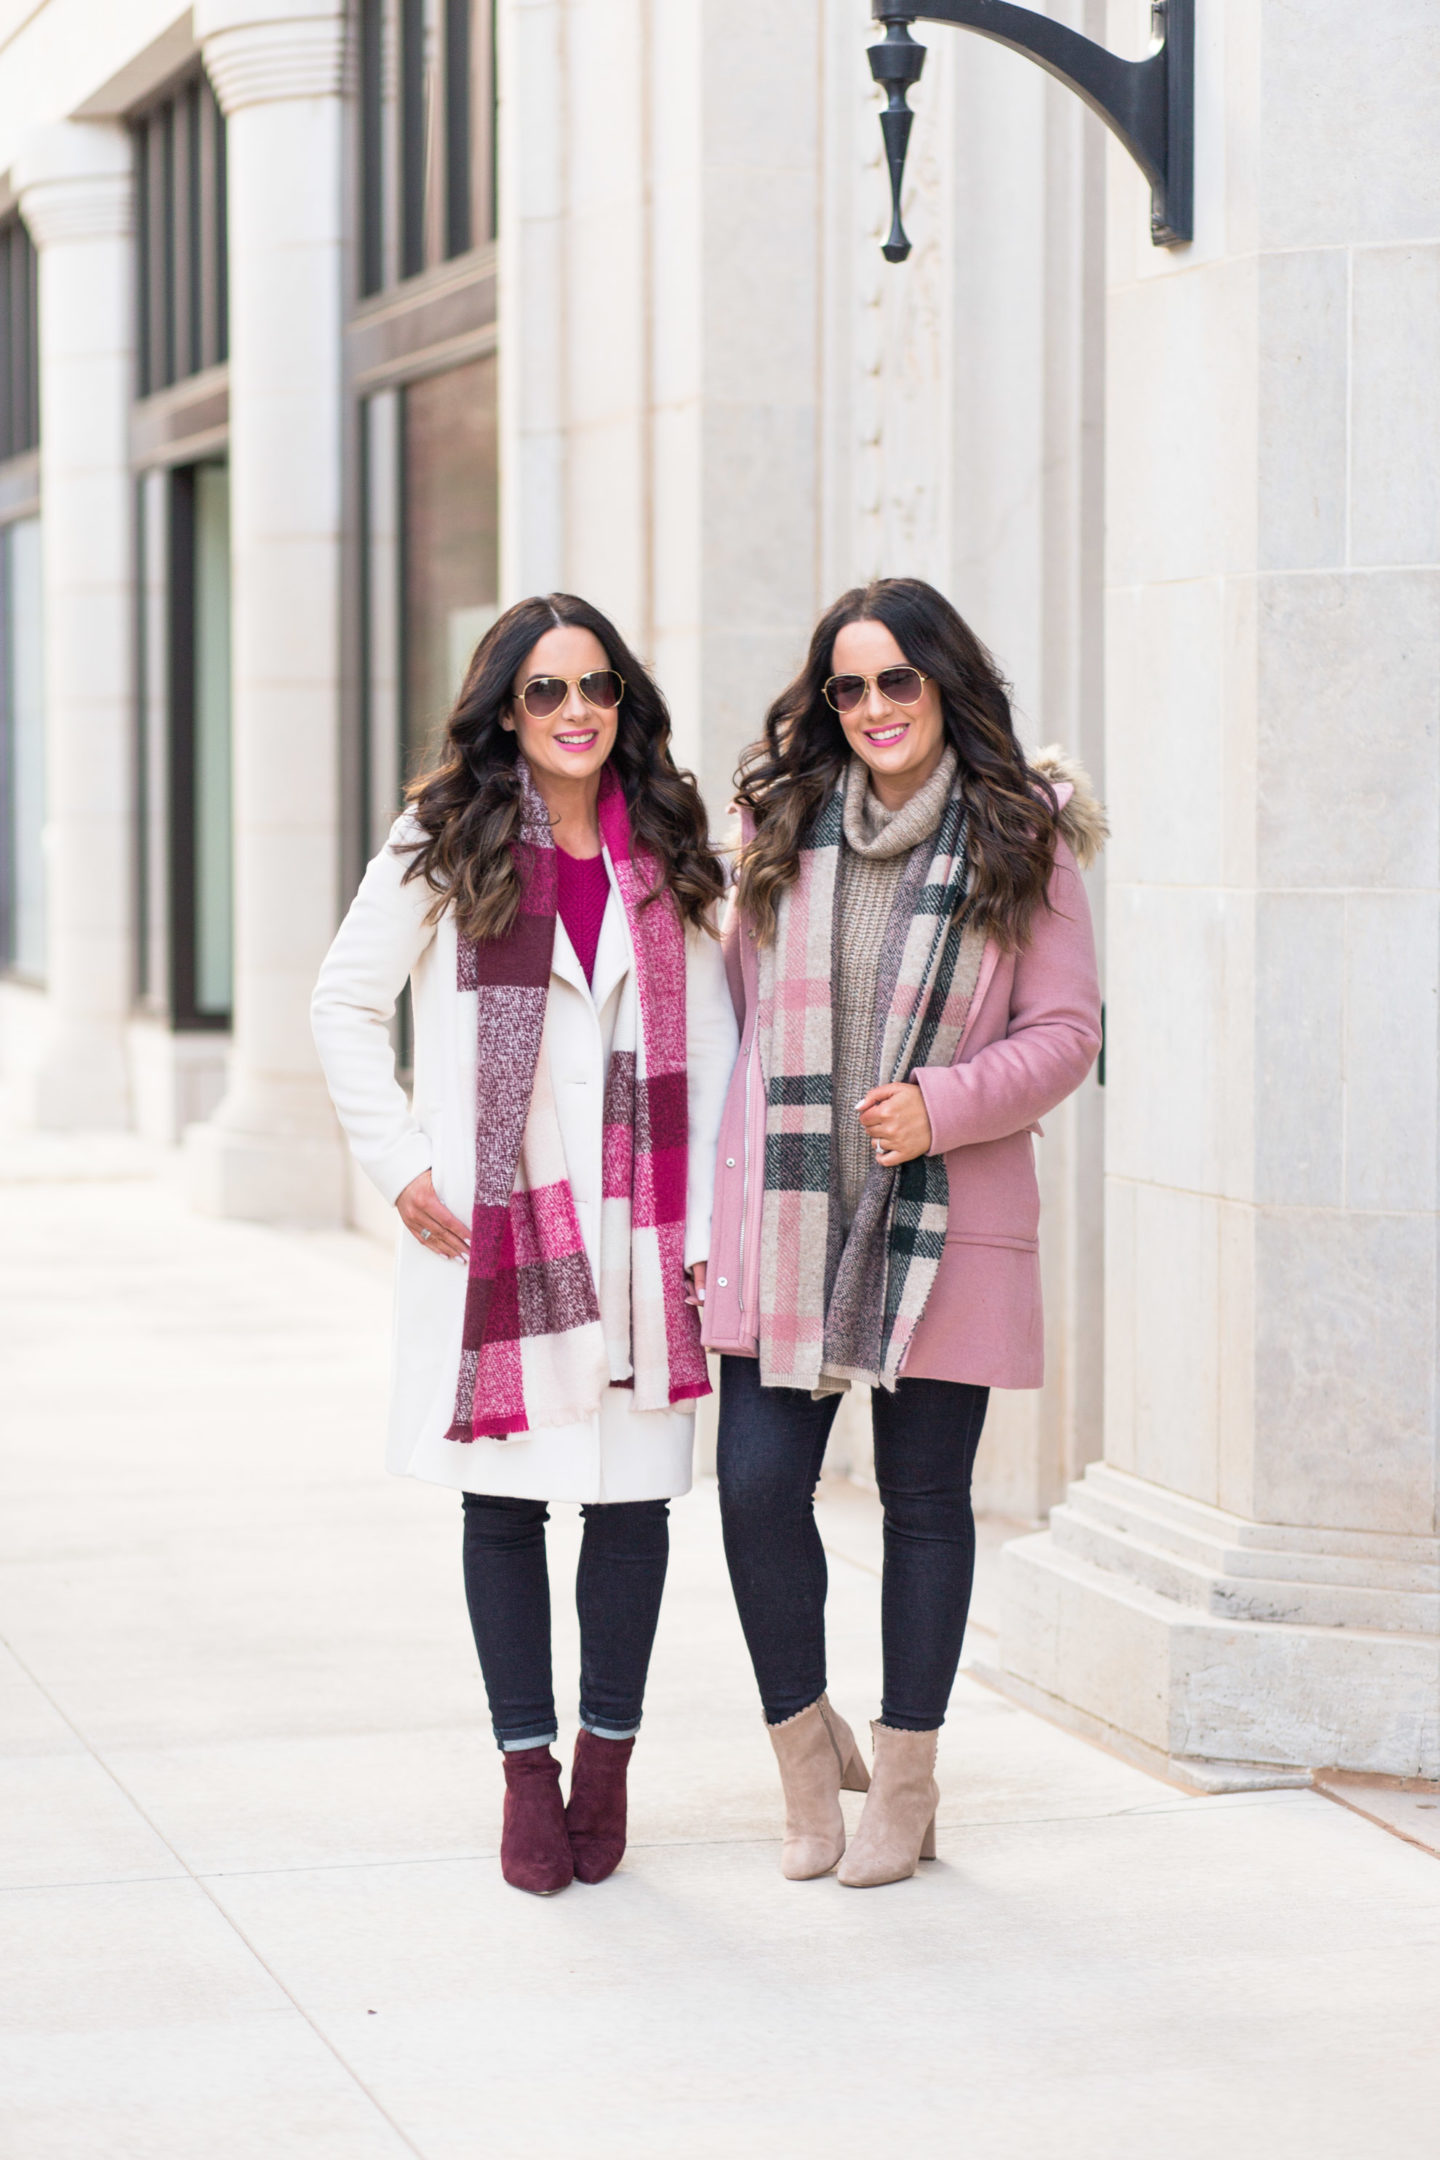 New Nordstrom Markdowns + Best After Christmas Sales! - The Double Take ...